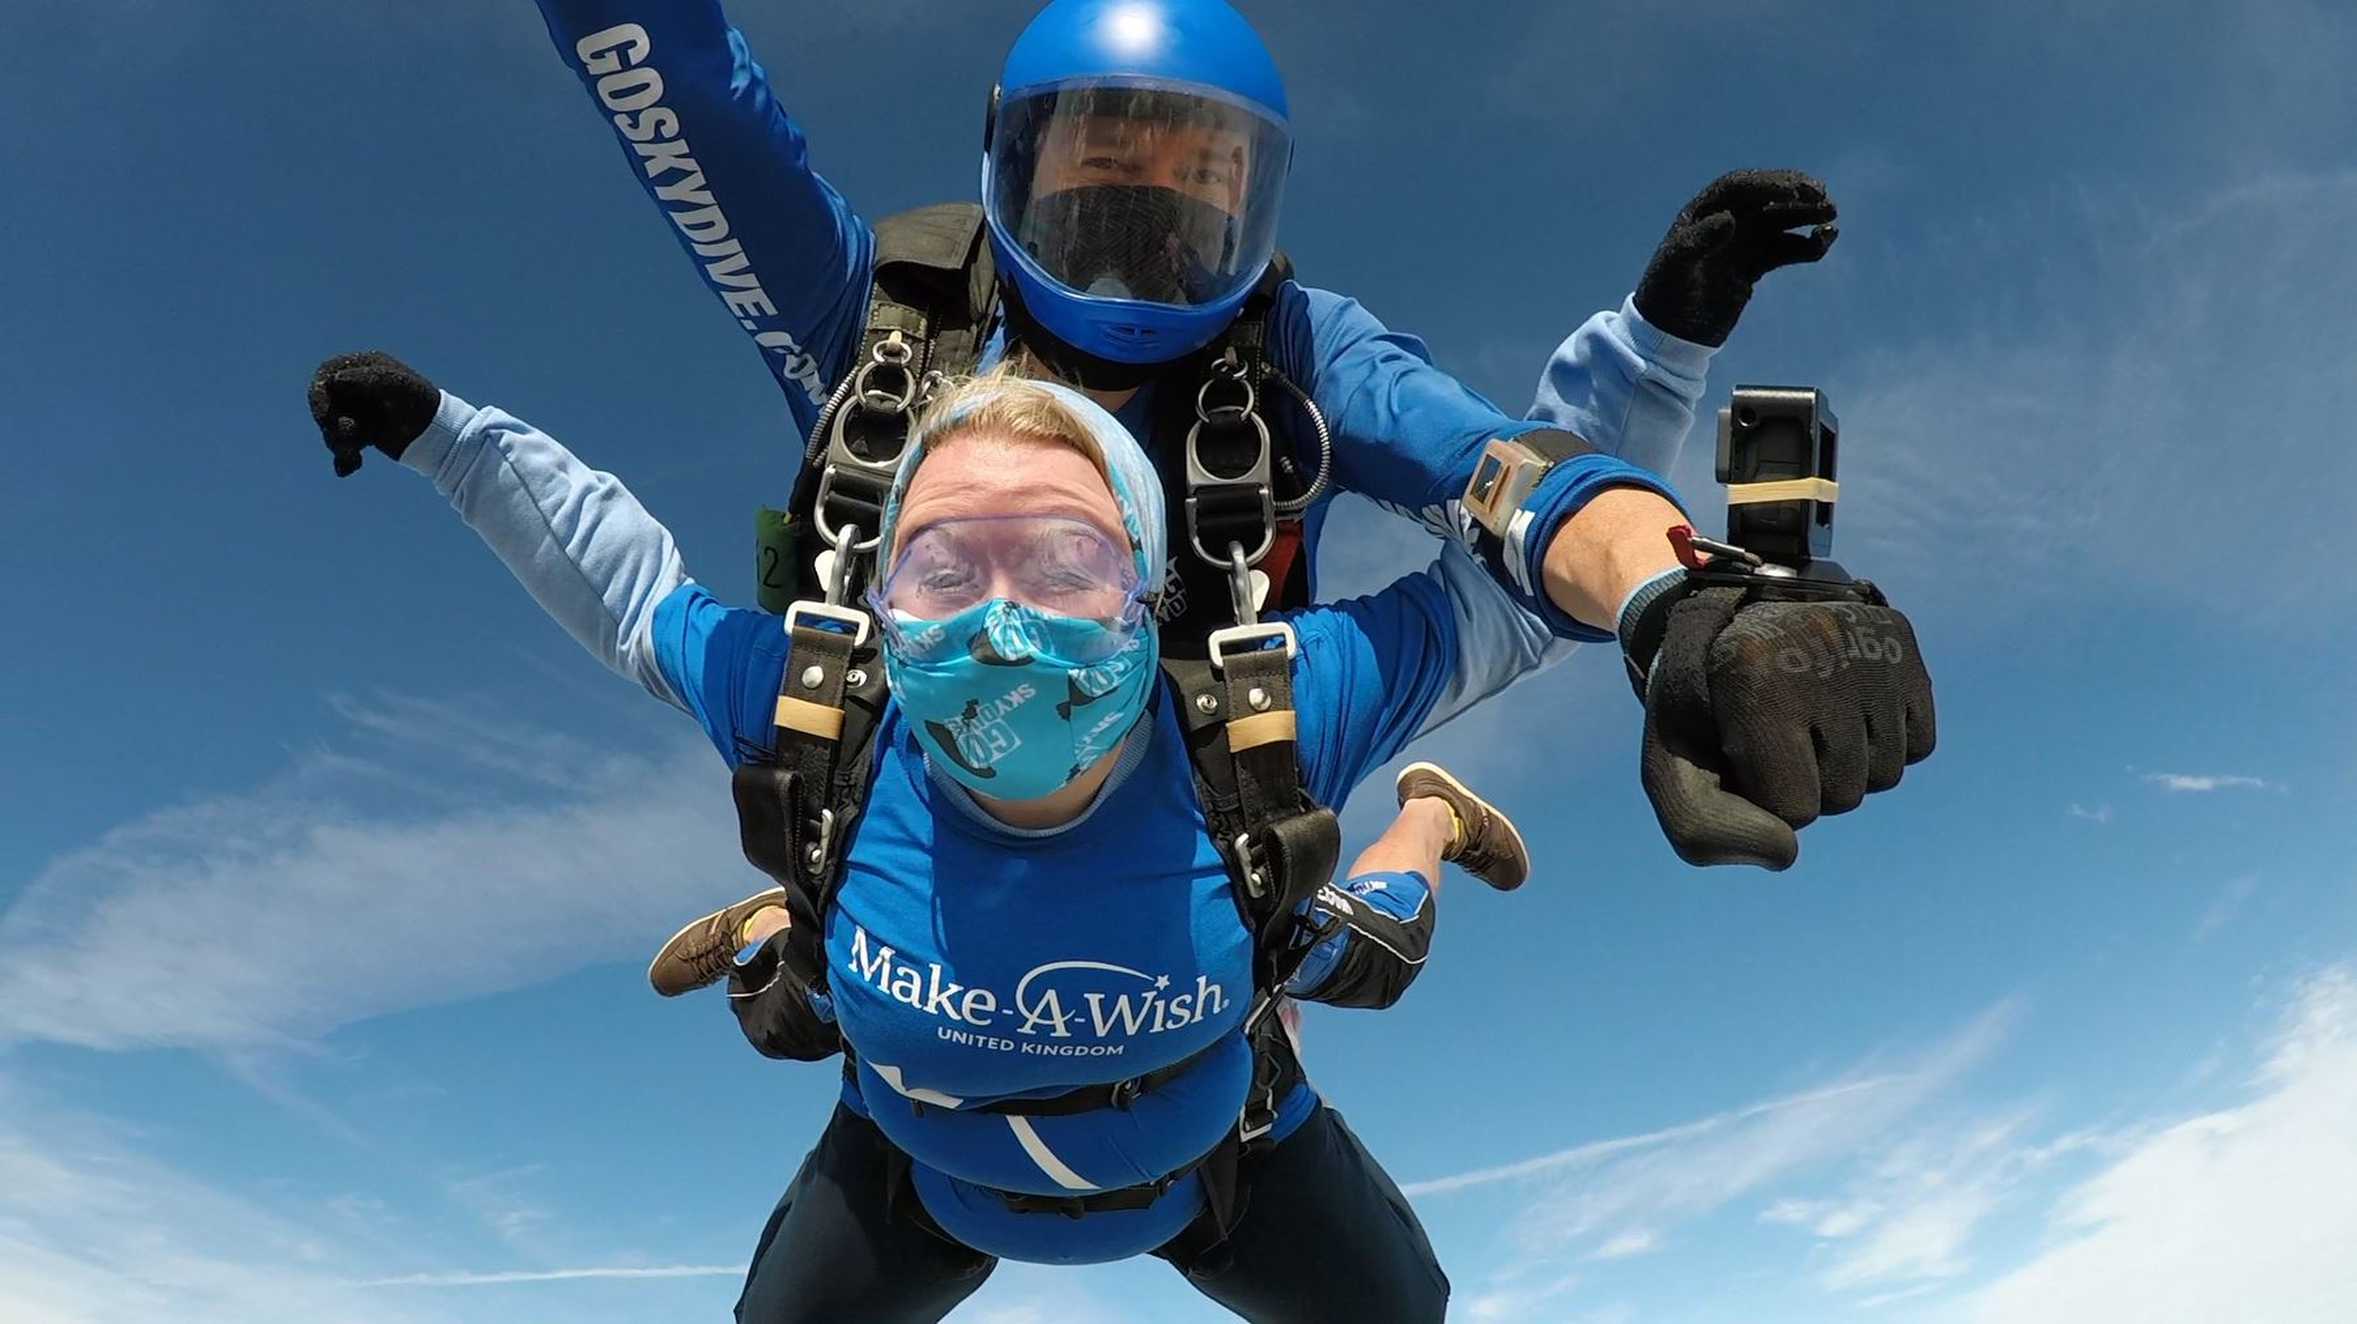 Rebecca skydives for a good cause to give children life-changing wishes #WishHero